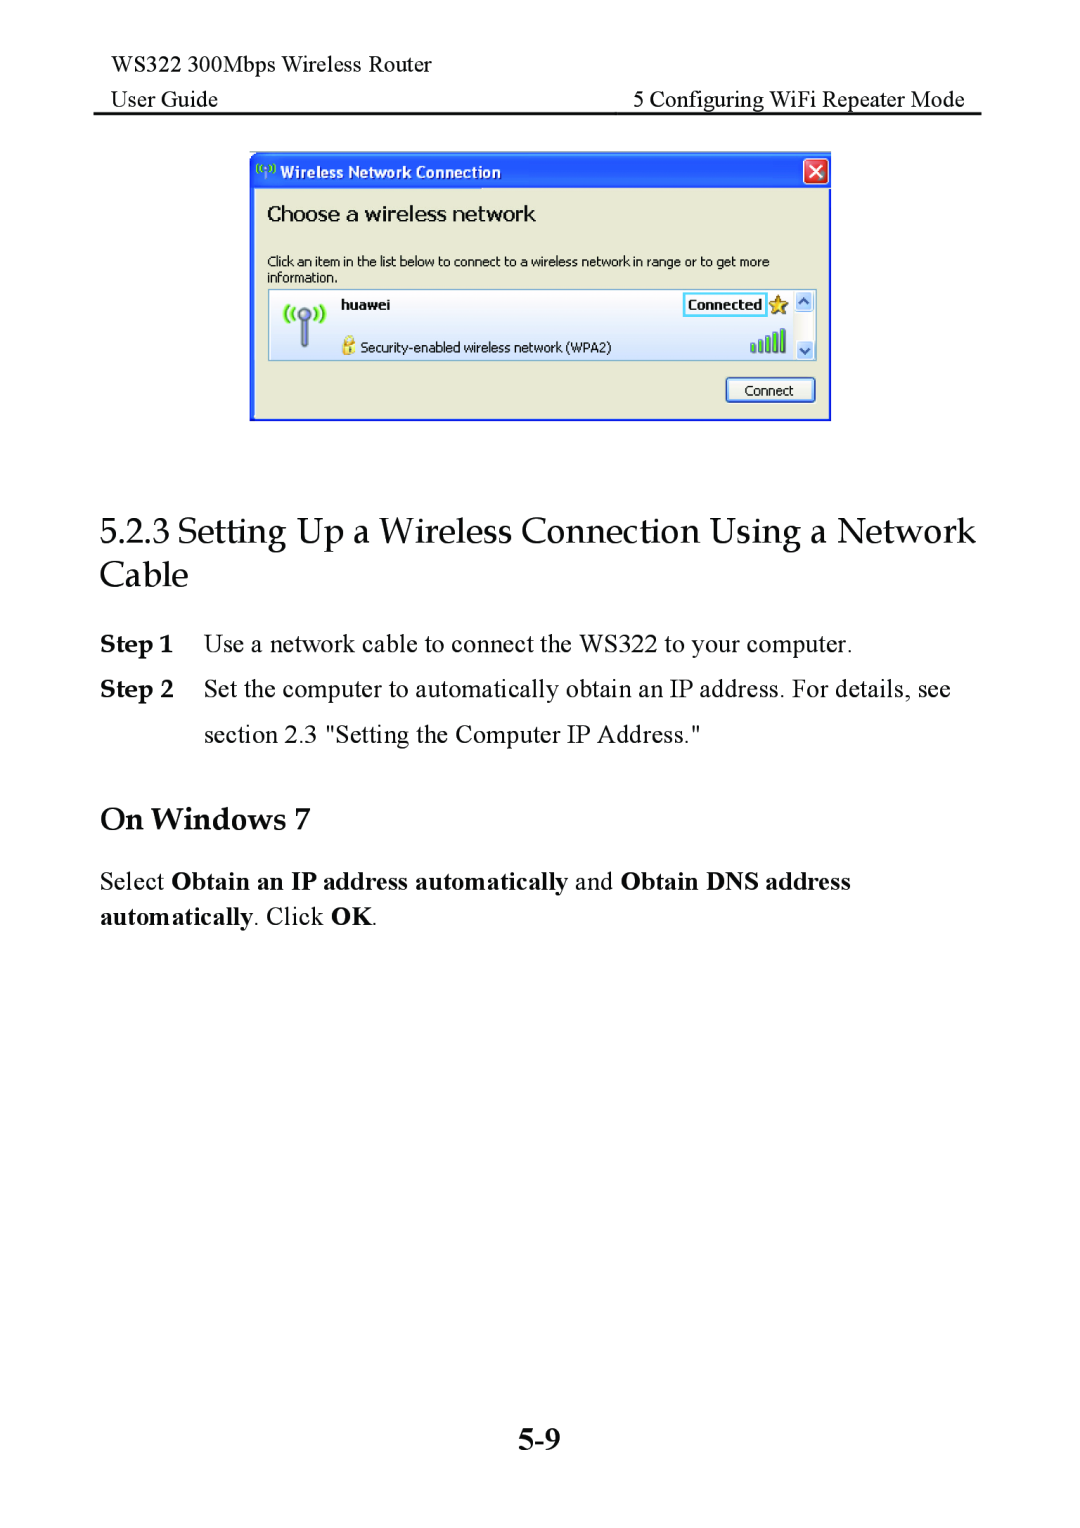 Huawei Setting Up a Wireless Connection Using a Network Cable, On Windows, WS322 300Mbps Wireless Router, User Guide 